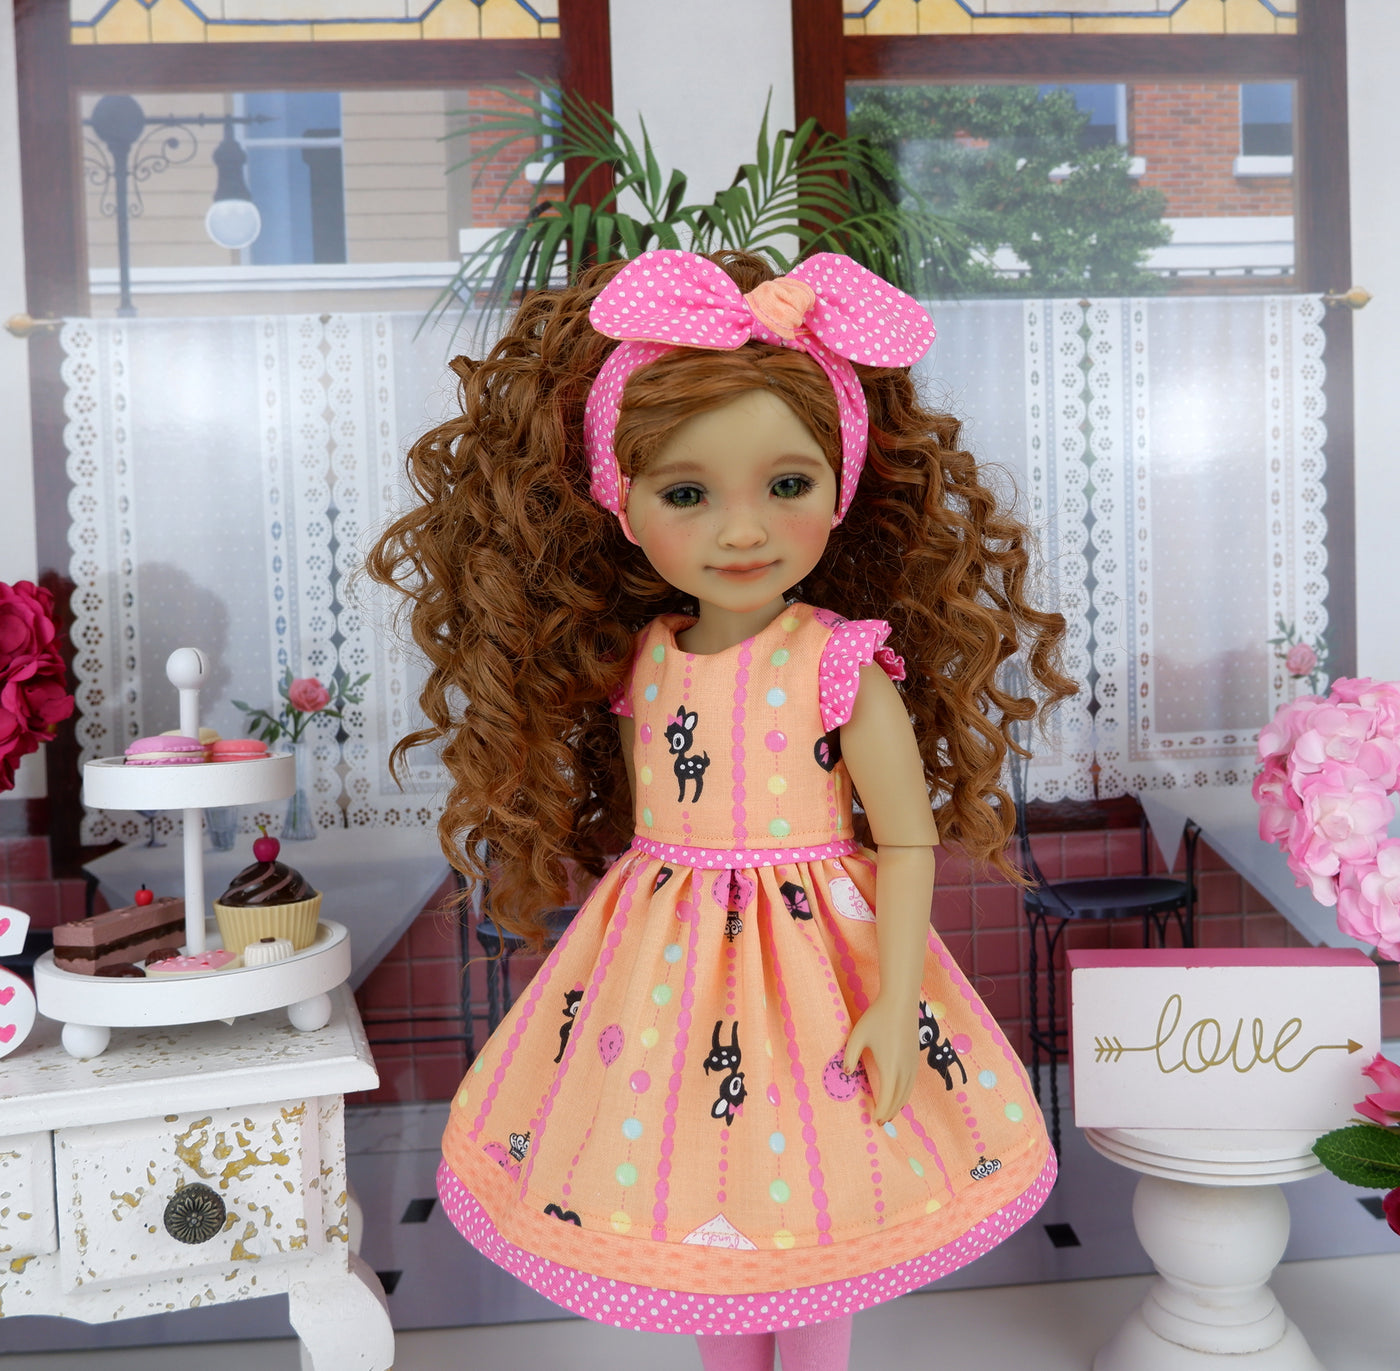 Valentine Party - dress with shoes for Ruby Red Fashion Friends doll